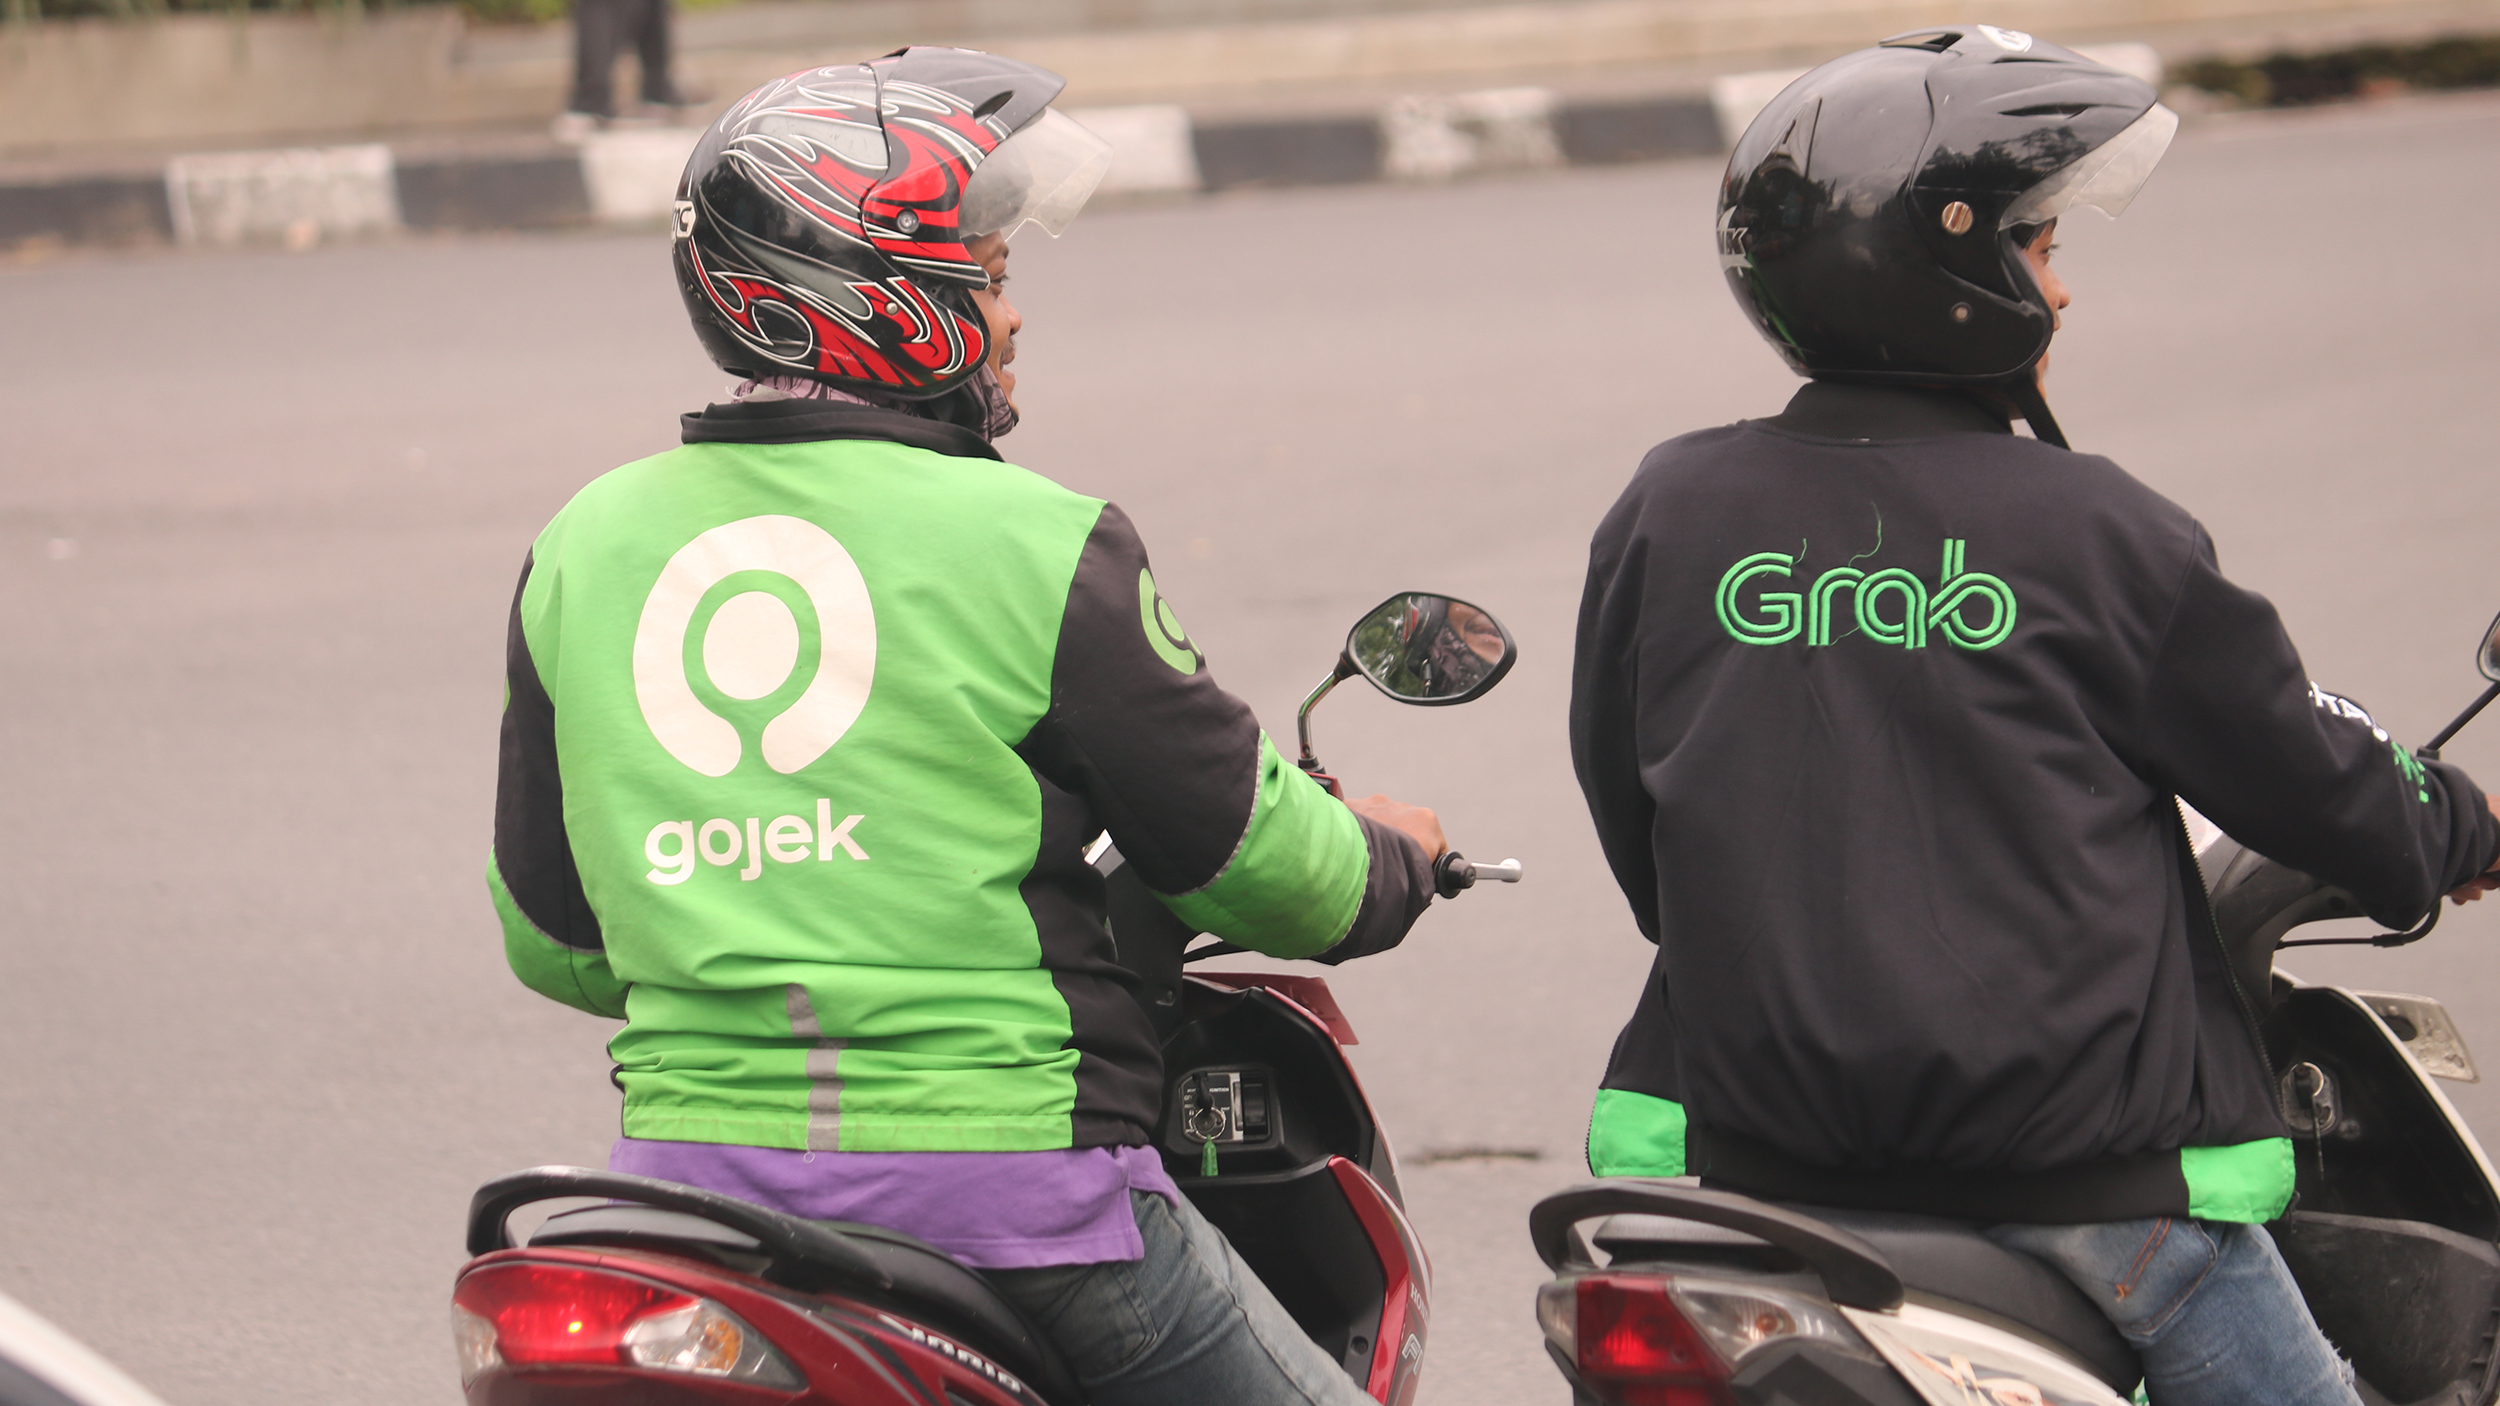 GoTo plus Grab: The merger that neither needs and regulators don’t want